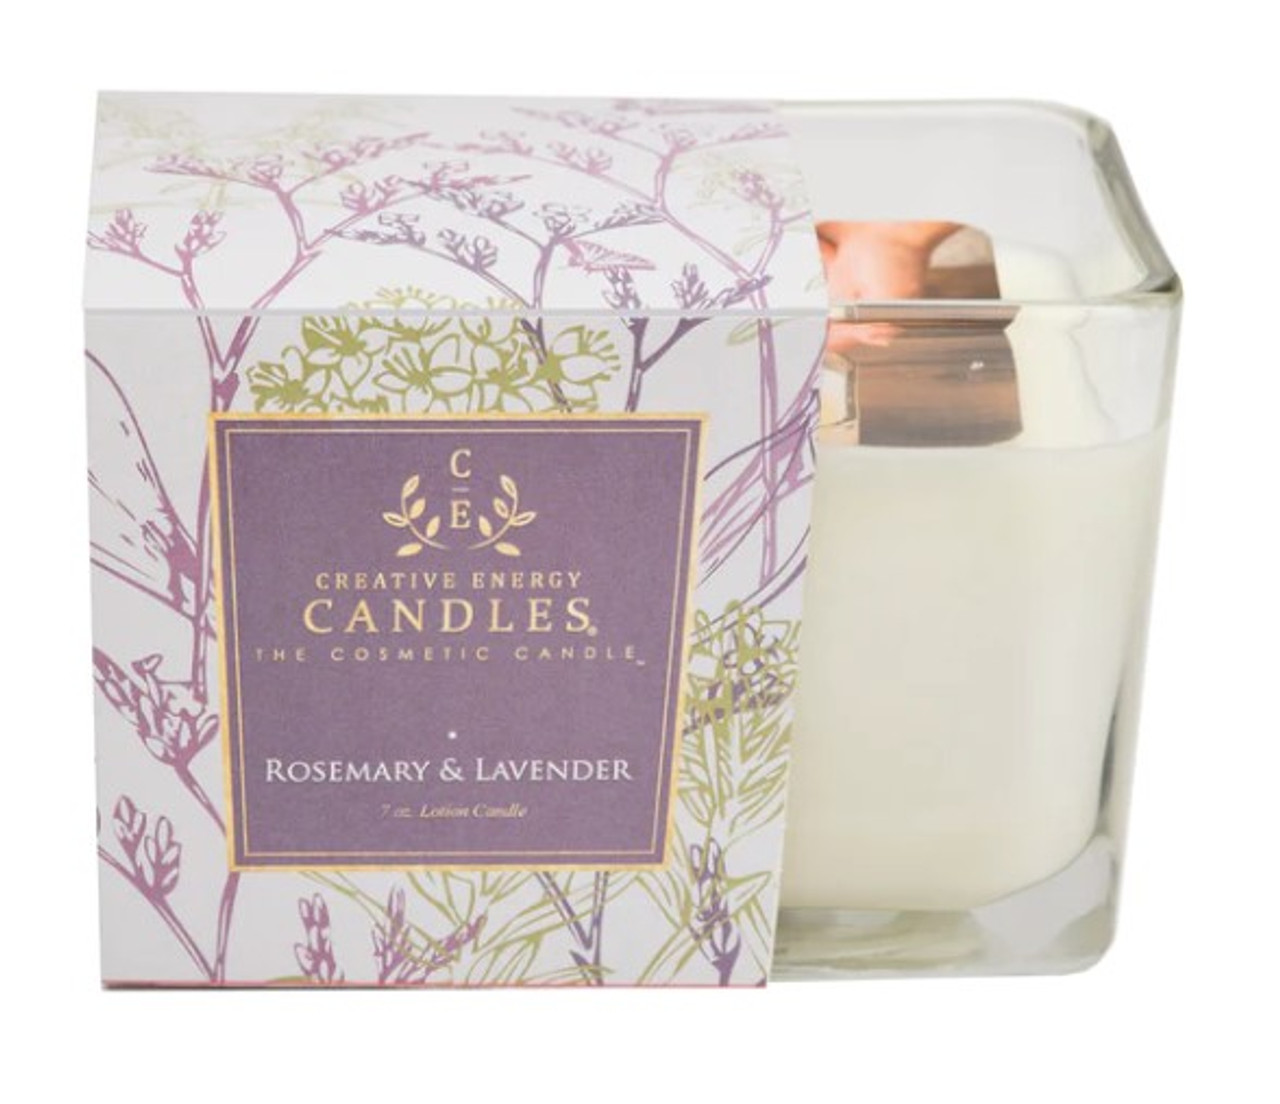 Rosemary & Lavender 2-in-1 Soy Candle and Lotion